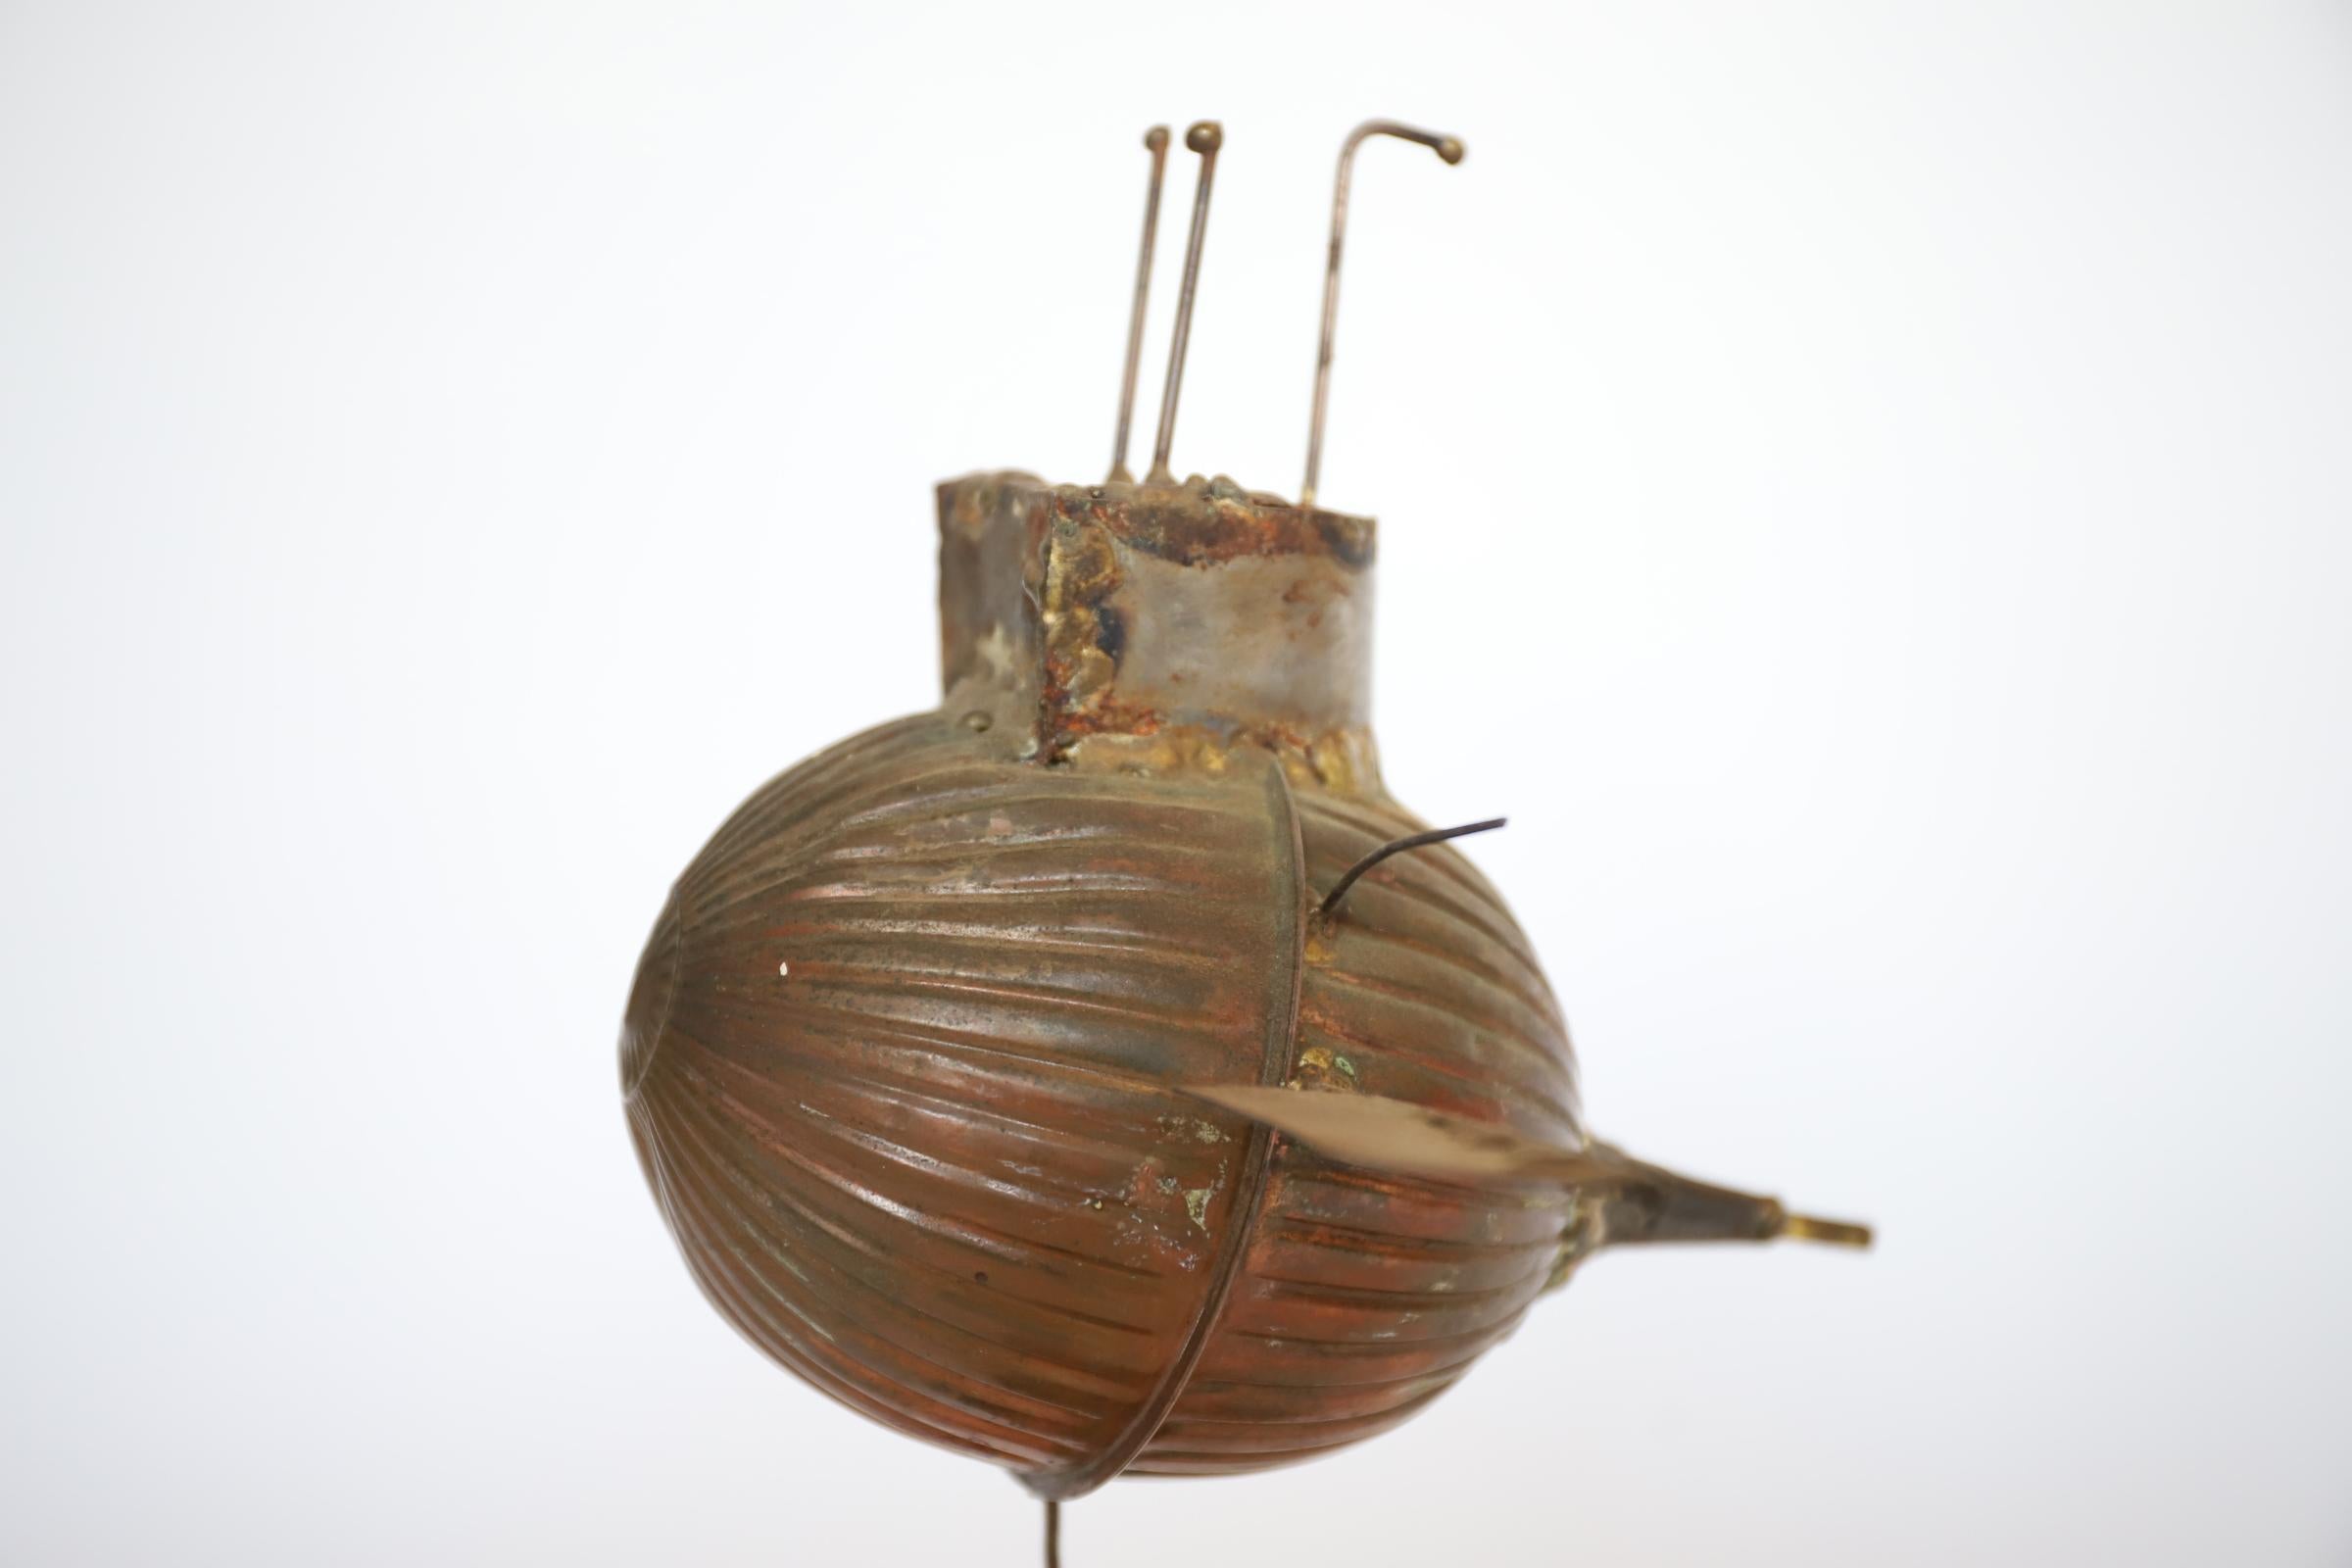 There’s trench art, and then there’s toilet humor - this is a little bit of both! Creative & fun sculpture composed of a copper toilet float, mounted on a small piece of hard driftwood. Float has a great aged patina. A bit kinetic - will sway. This